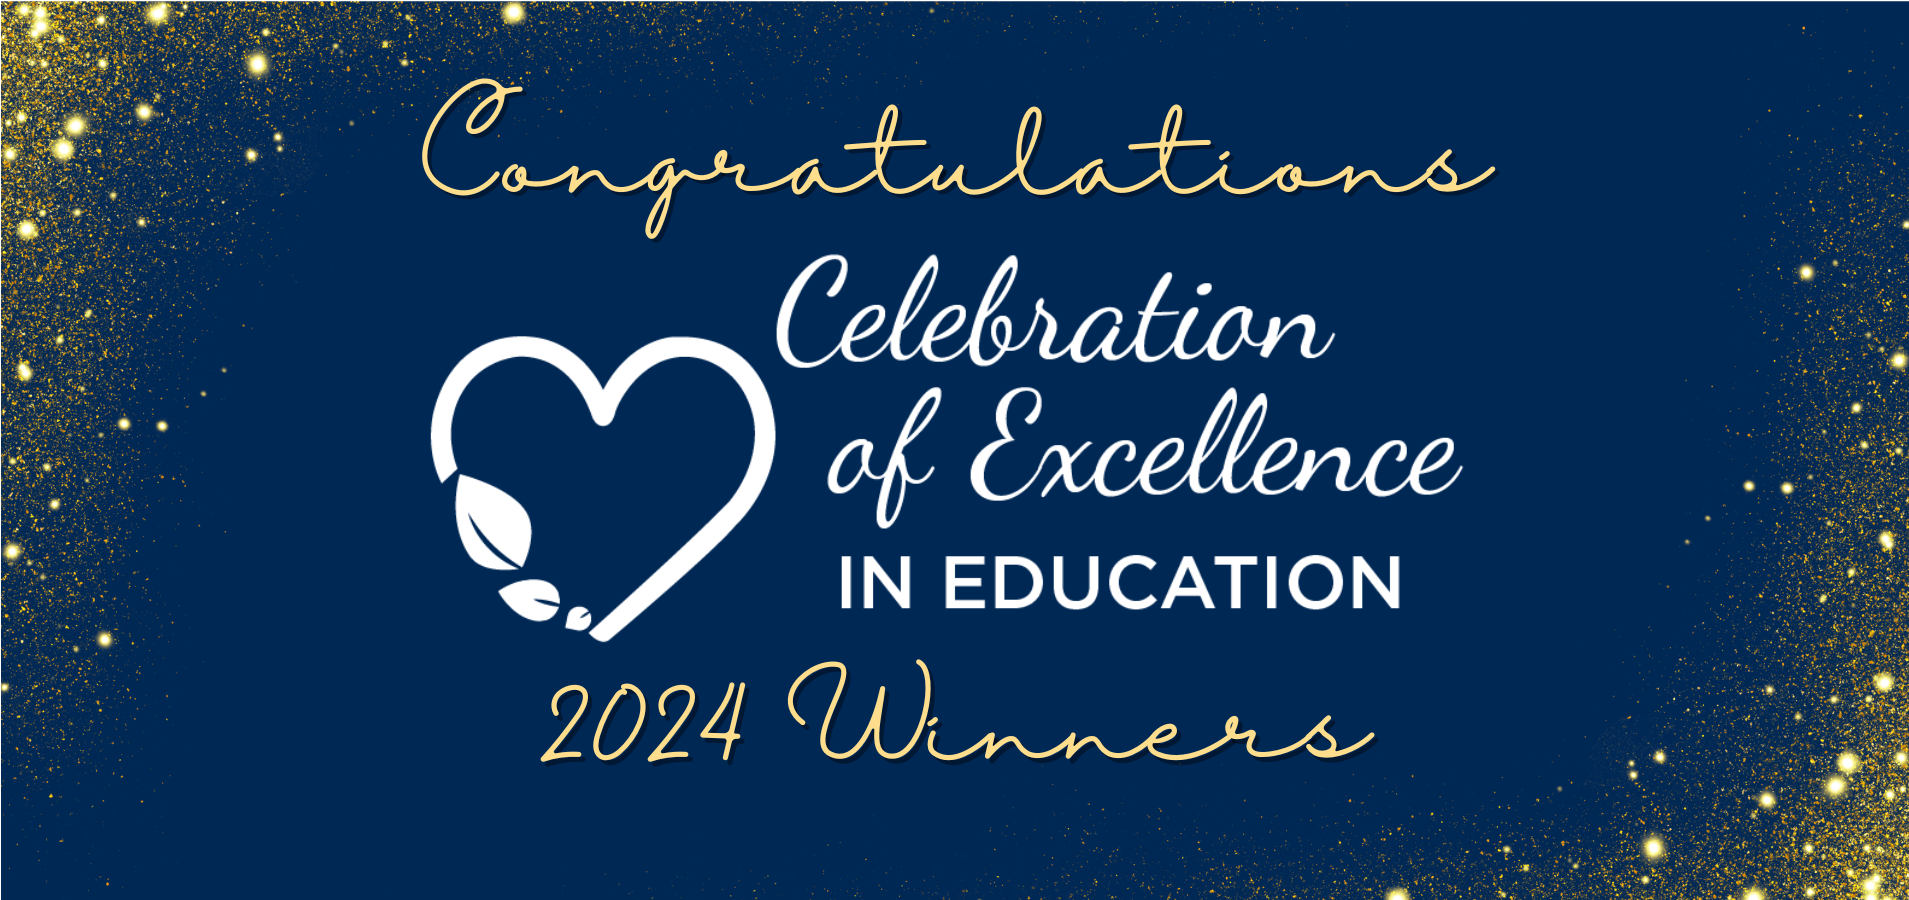 Celebration of Excellence in Education 2024 Winner Announcement